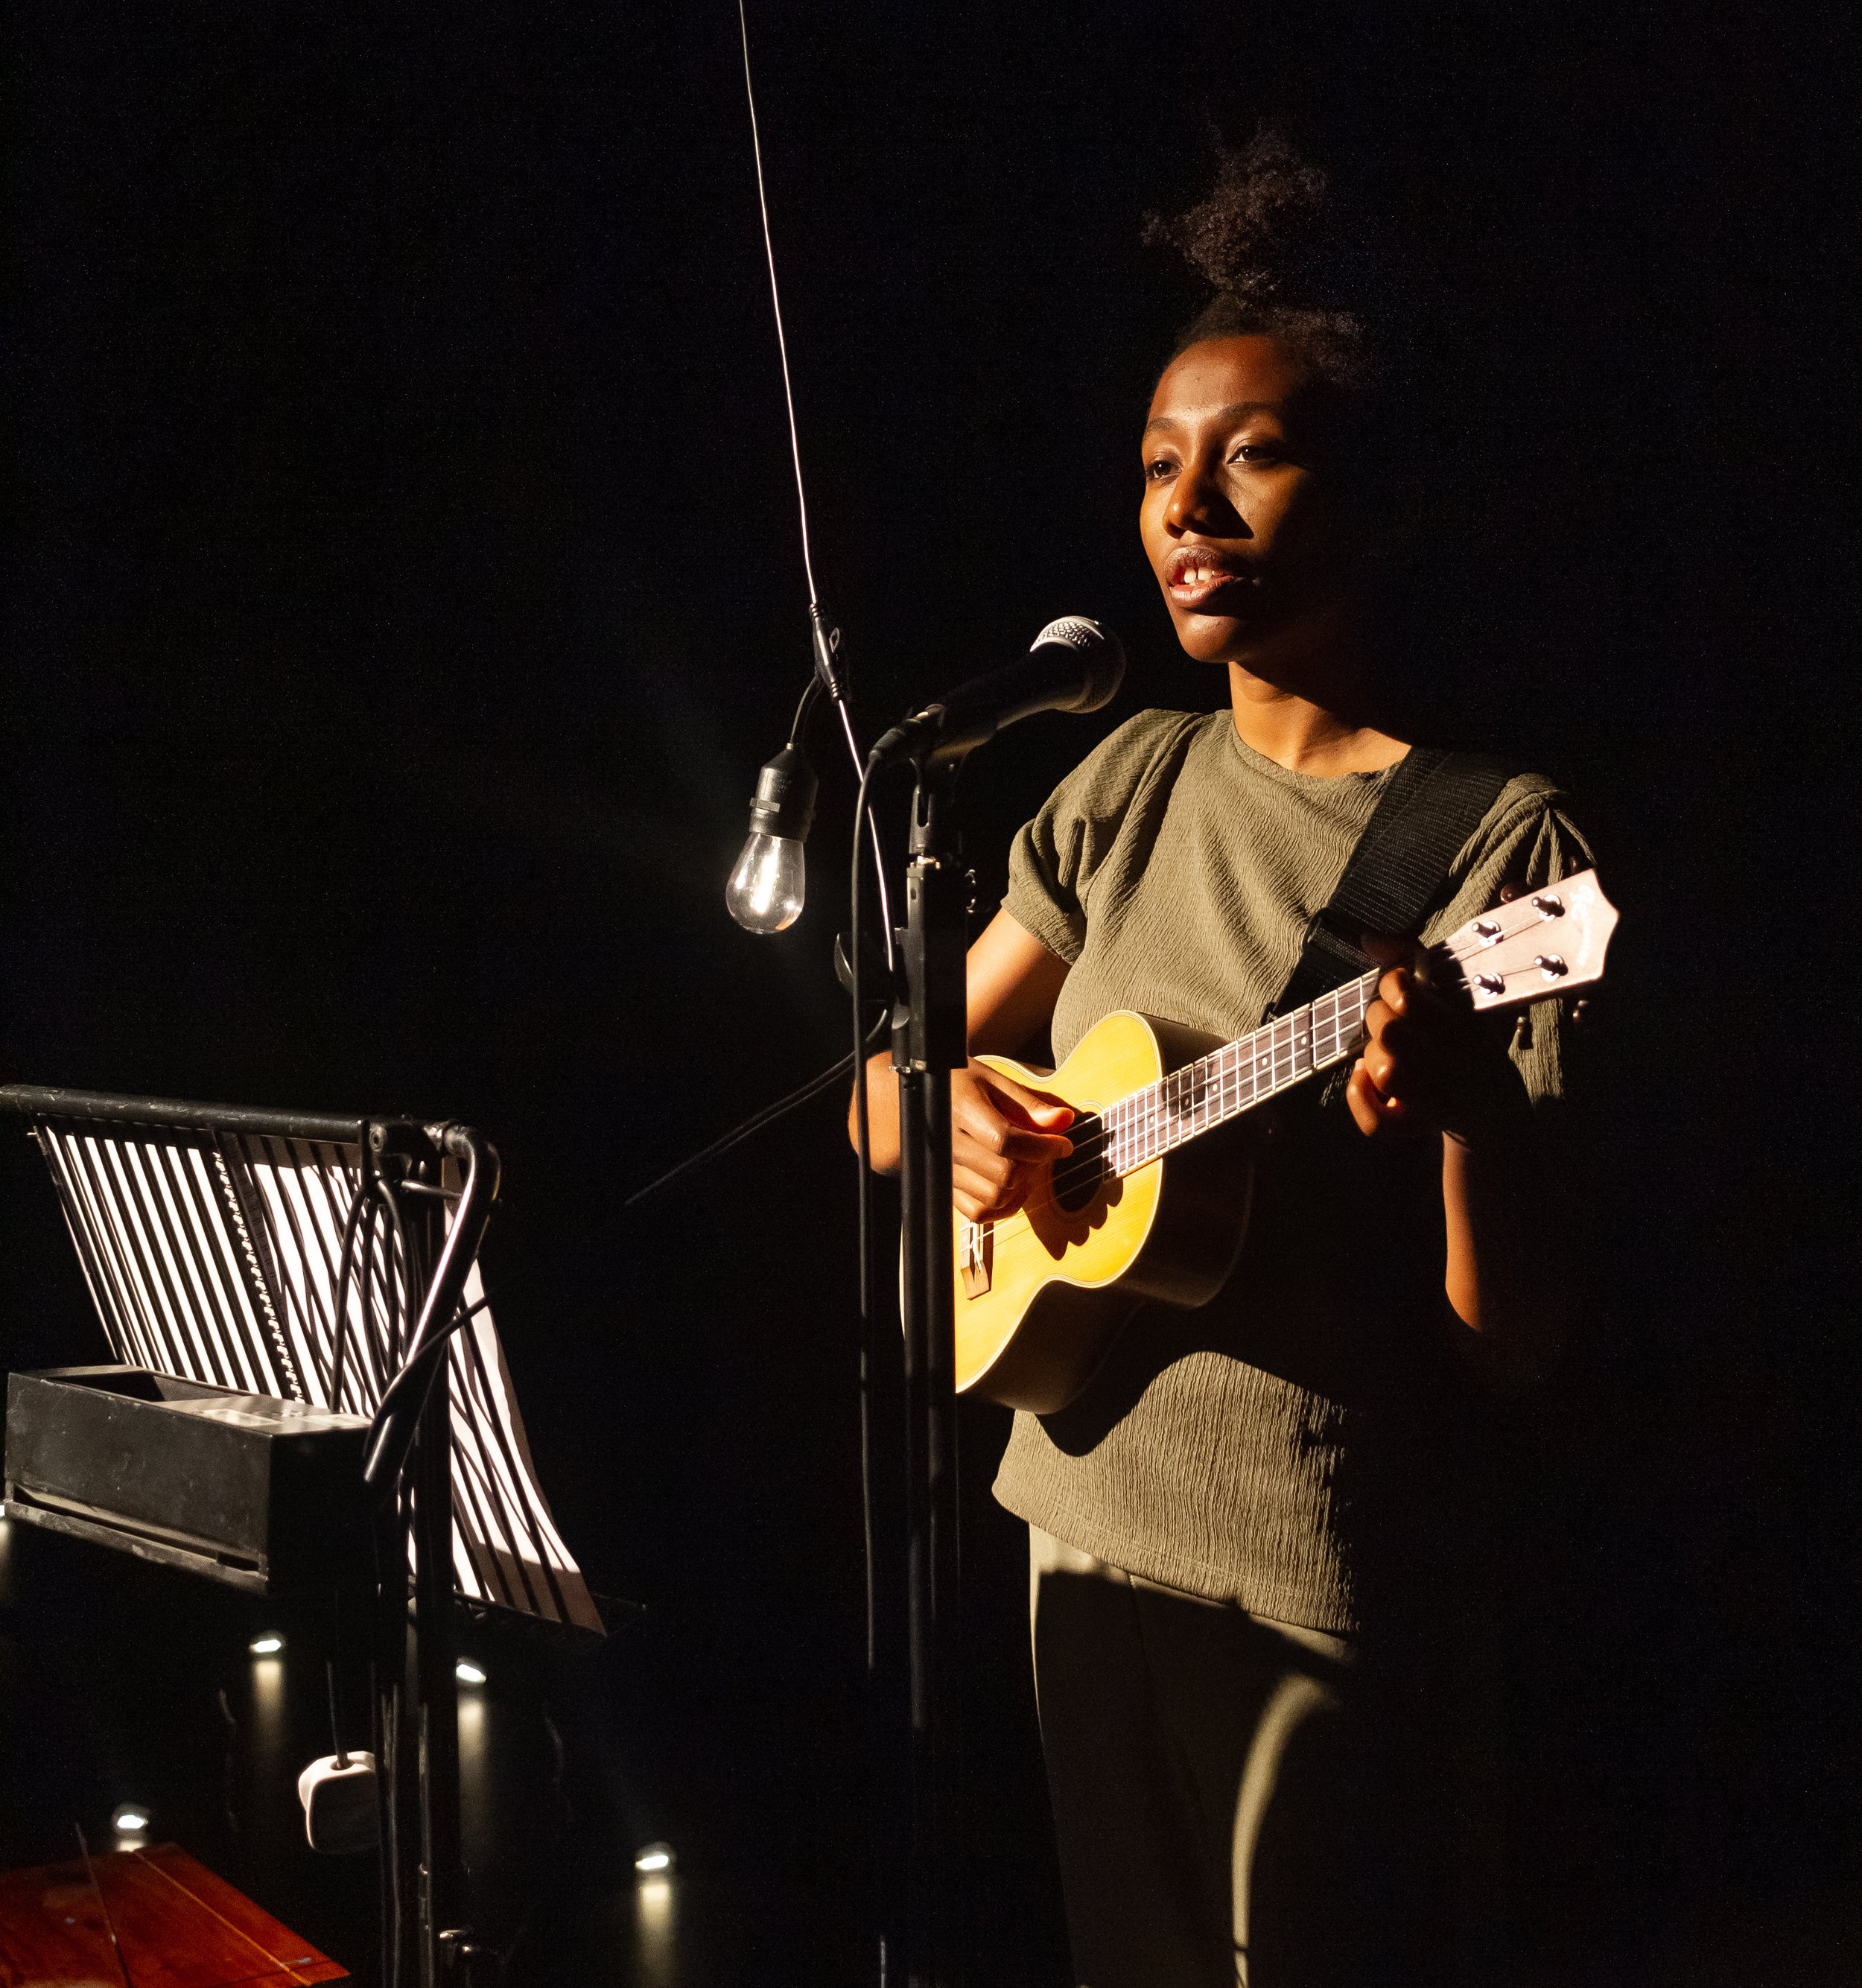  A Black woman is stood playing ukelele in front of a music stand and microphone a festoon bulb also hangs from the microphone stand  